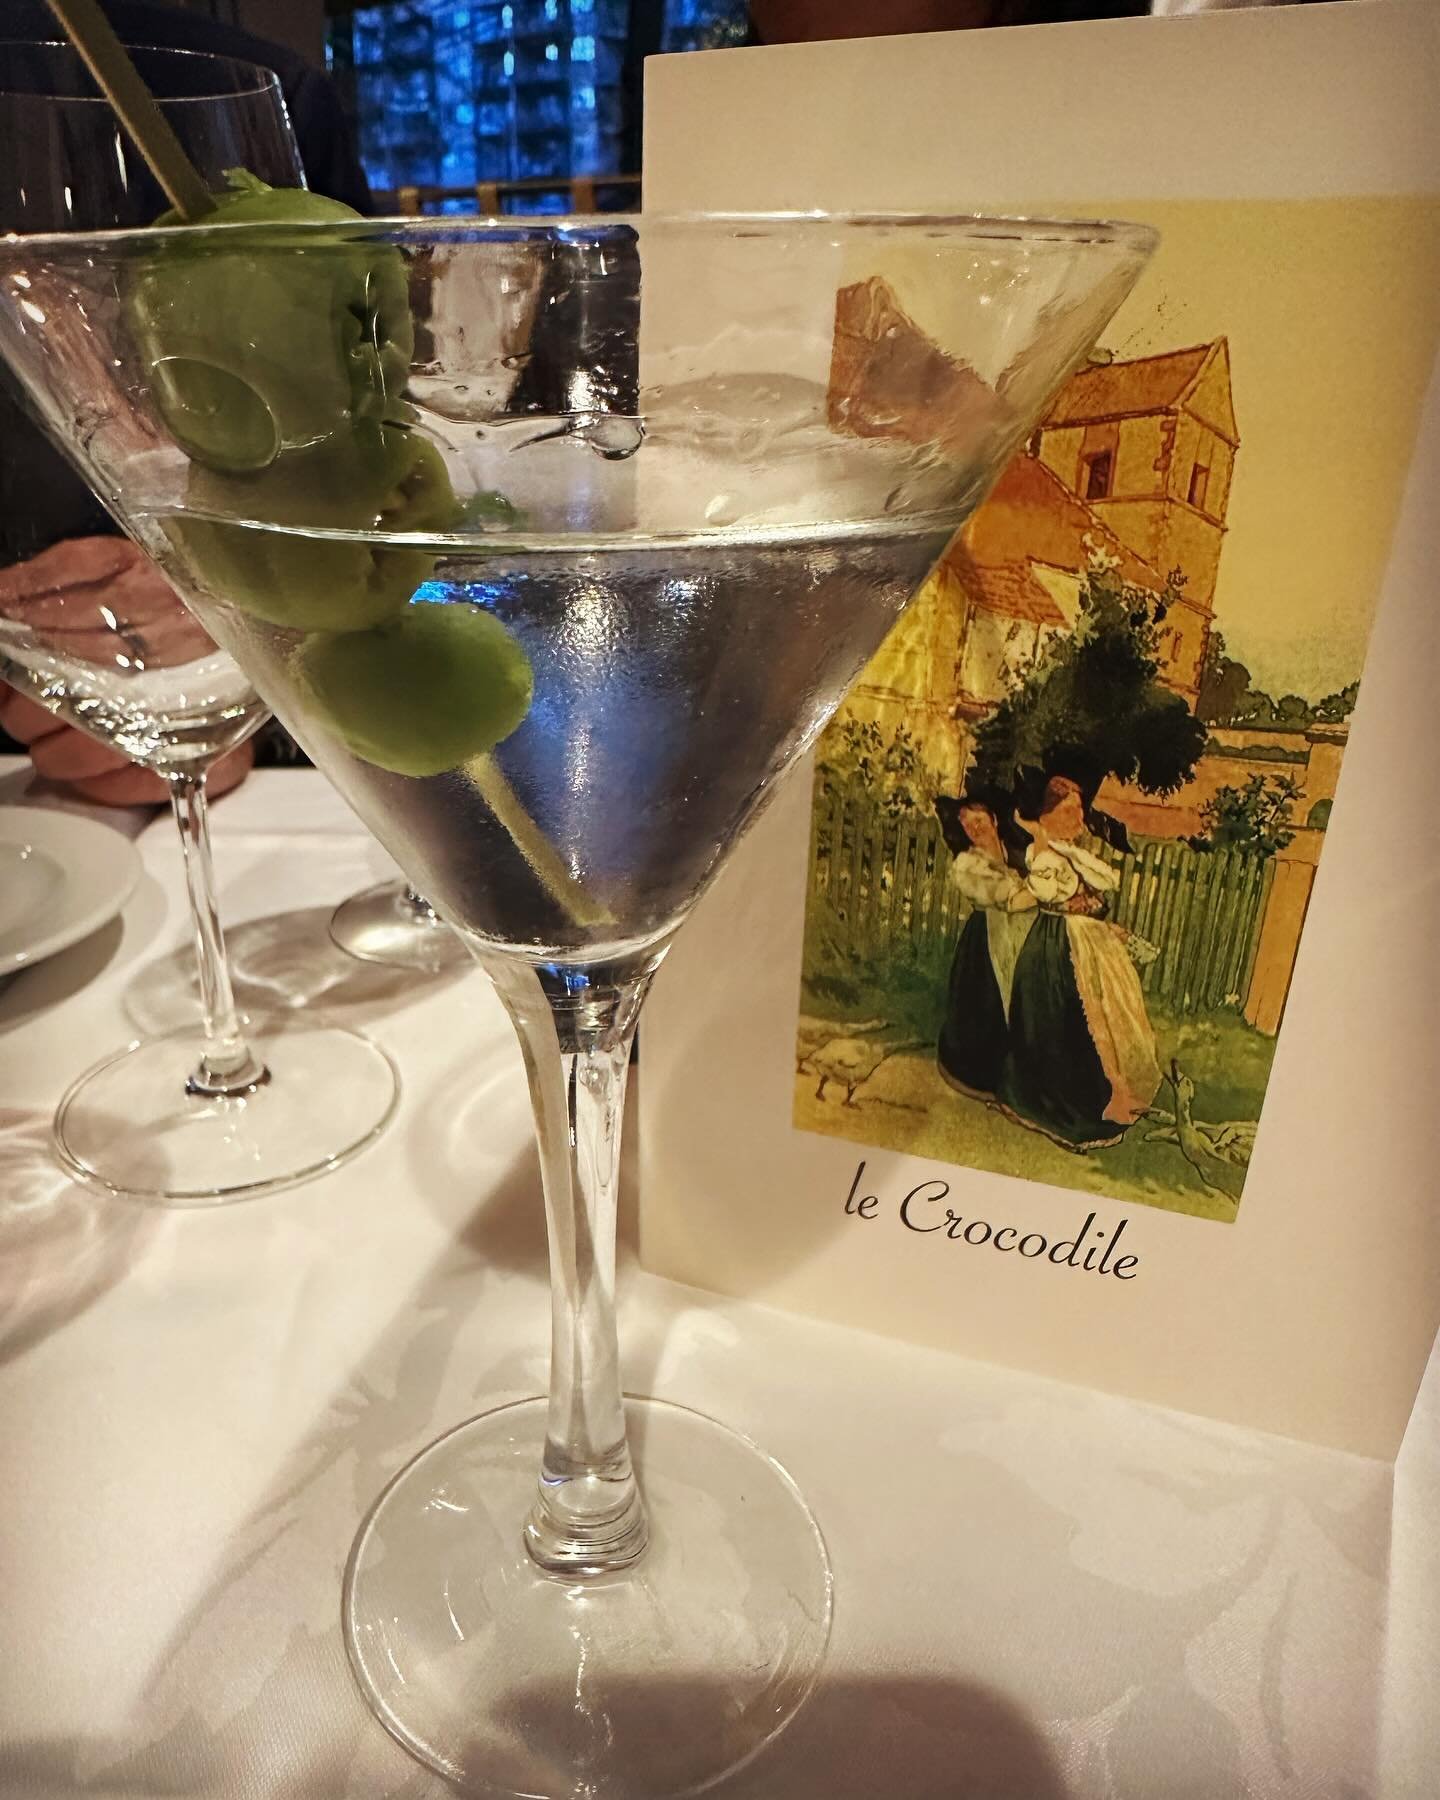 Shaken not stirred.  #martini  Cheers and sant&eacute; to Chef Michel Jacob of @lecrocodilerestaurant  Retiring tonight after 41 years. Un gros merci! ❤️